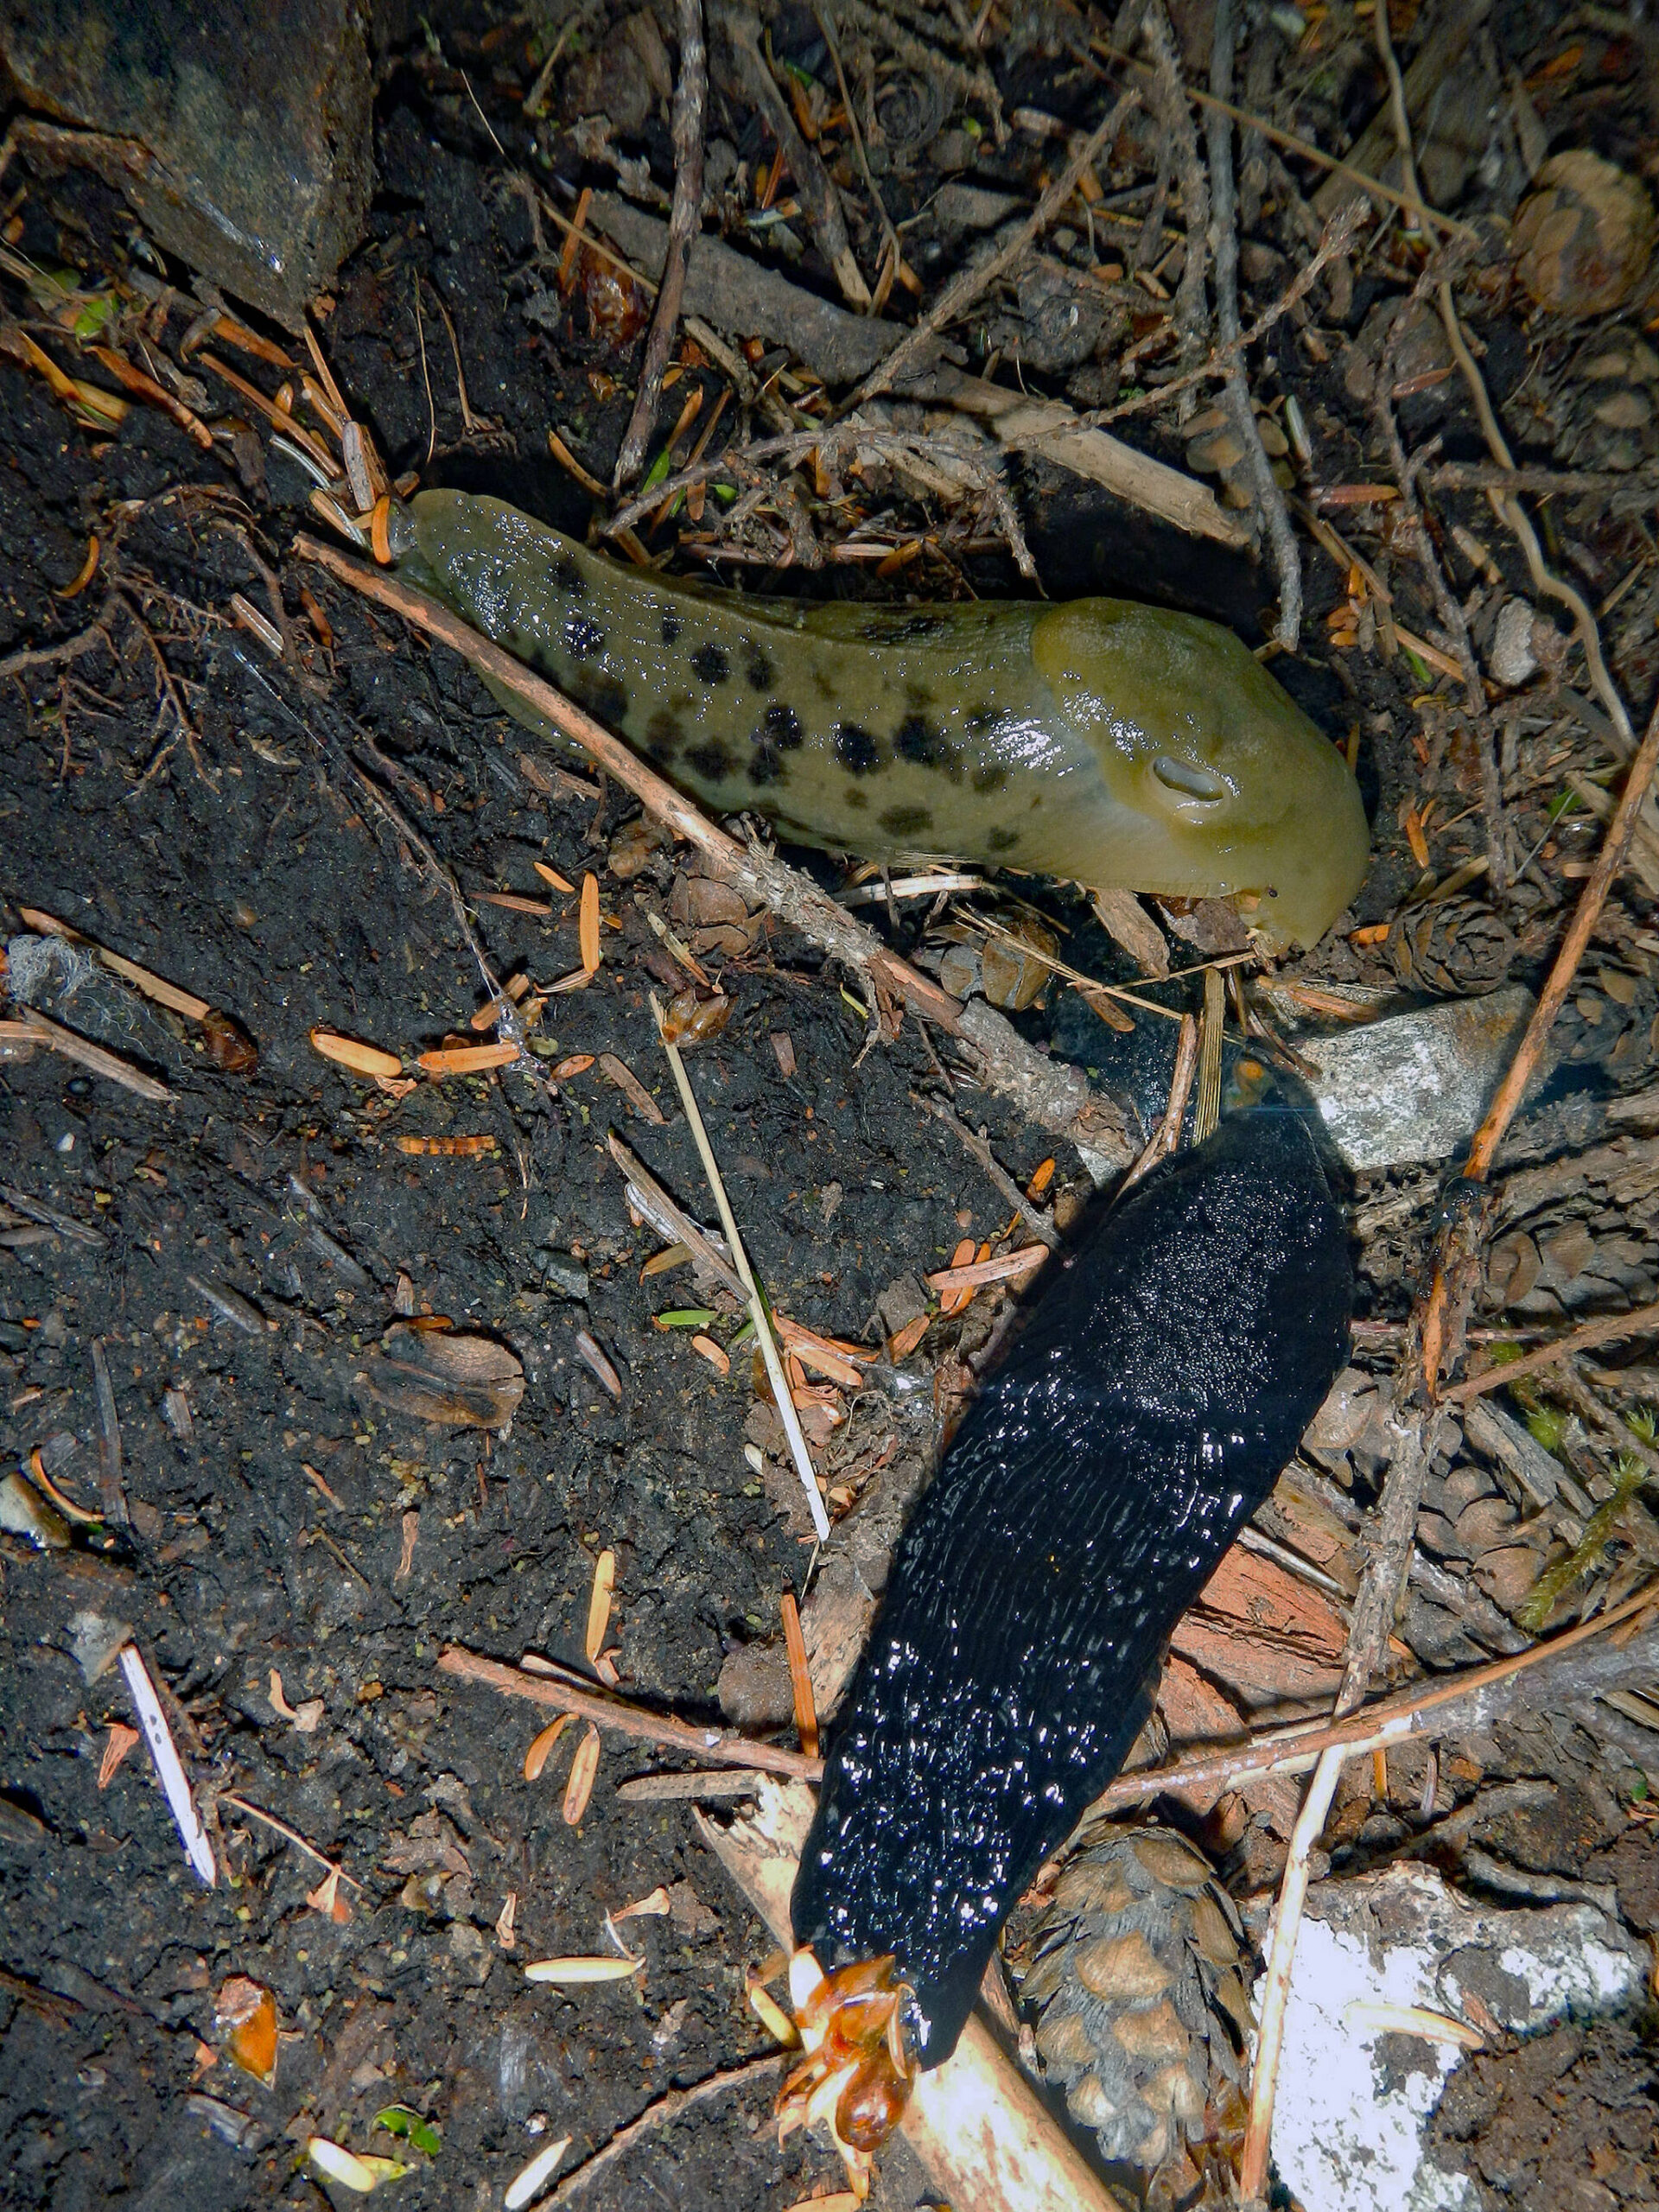 A giant black slug in the process of challenging a Pacific banana slug to a fight. The banana slugs are common in Southeast Alaska and native in the Pacific Northwest, and can grow to up to nine inches long. (Photo by Dimitra Lavrakas)